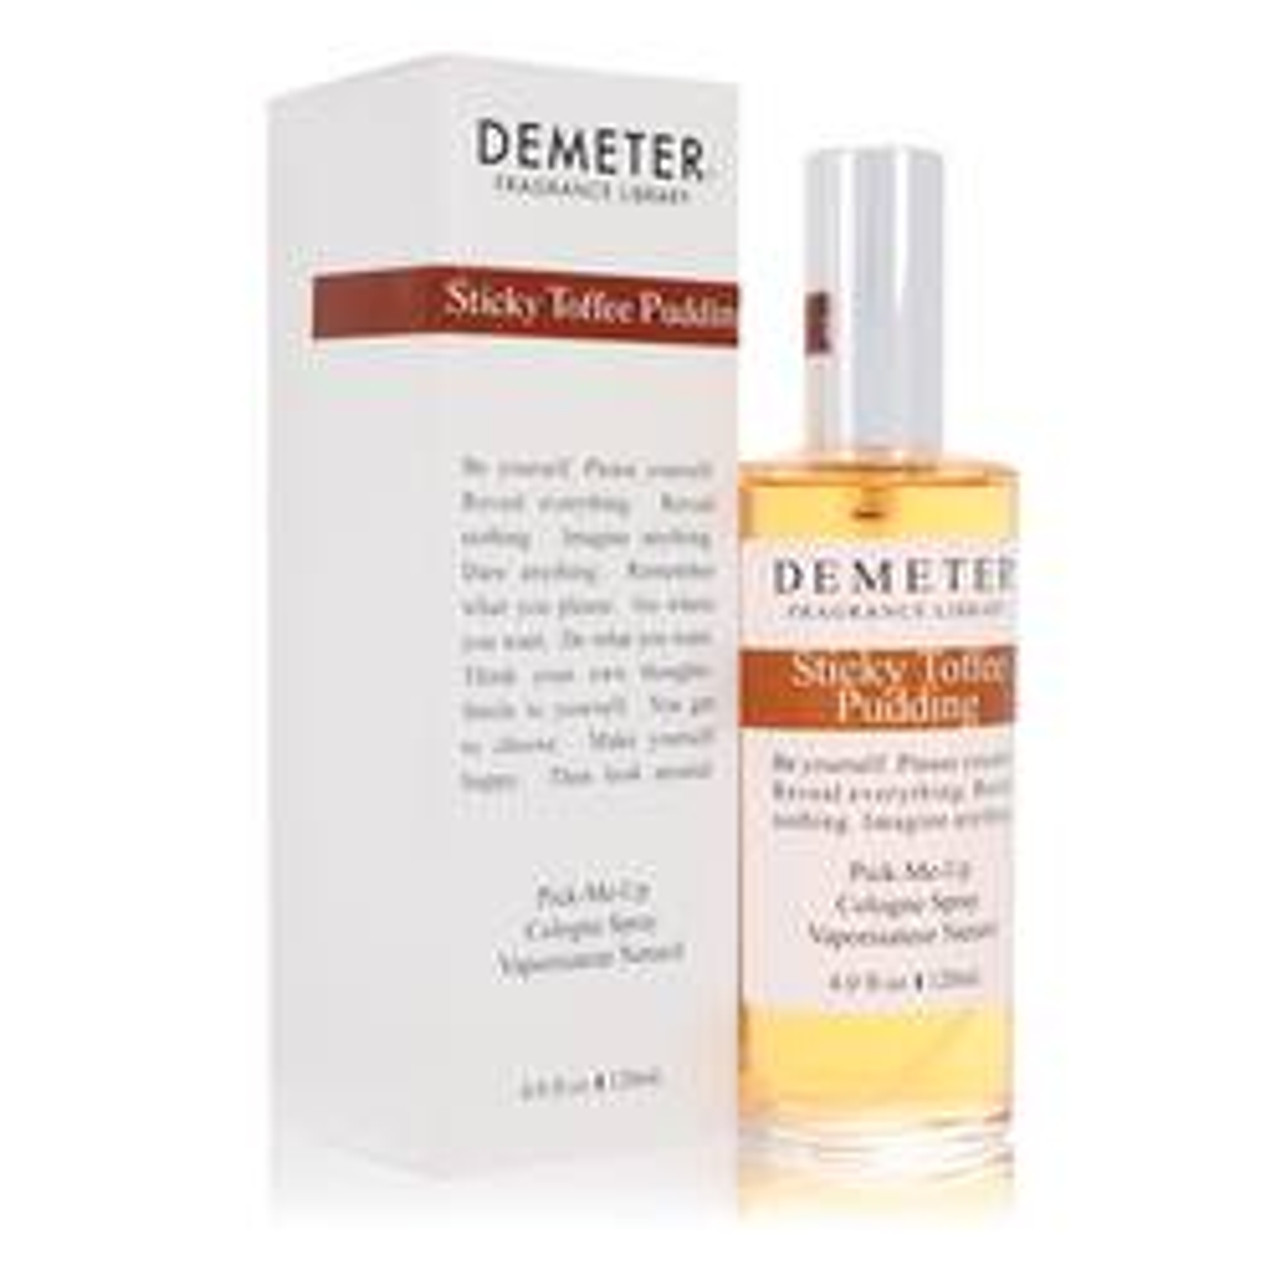 Demeter Sticky Toffe Pudding Perfume By Demeter Cologne Spray 4 oz for Women - [From 79.50 - Choose pk Qty ] - *Ships from Miami